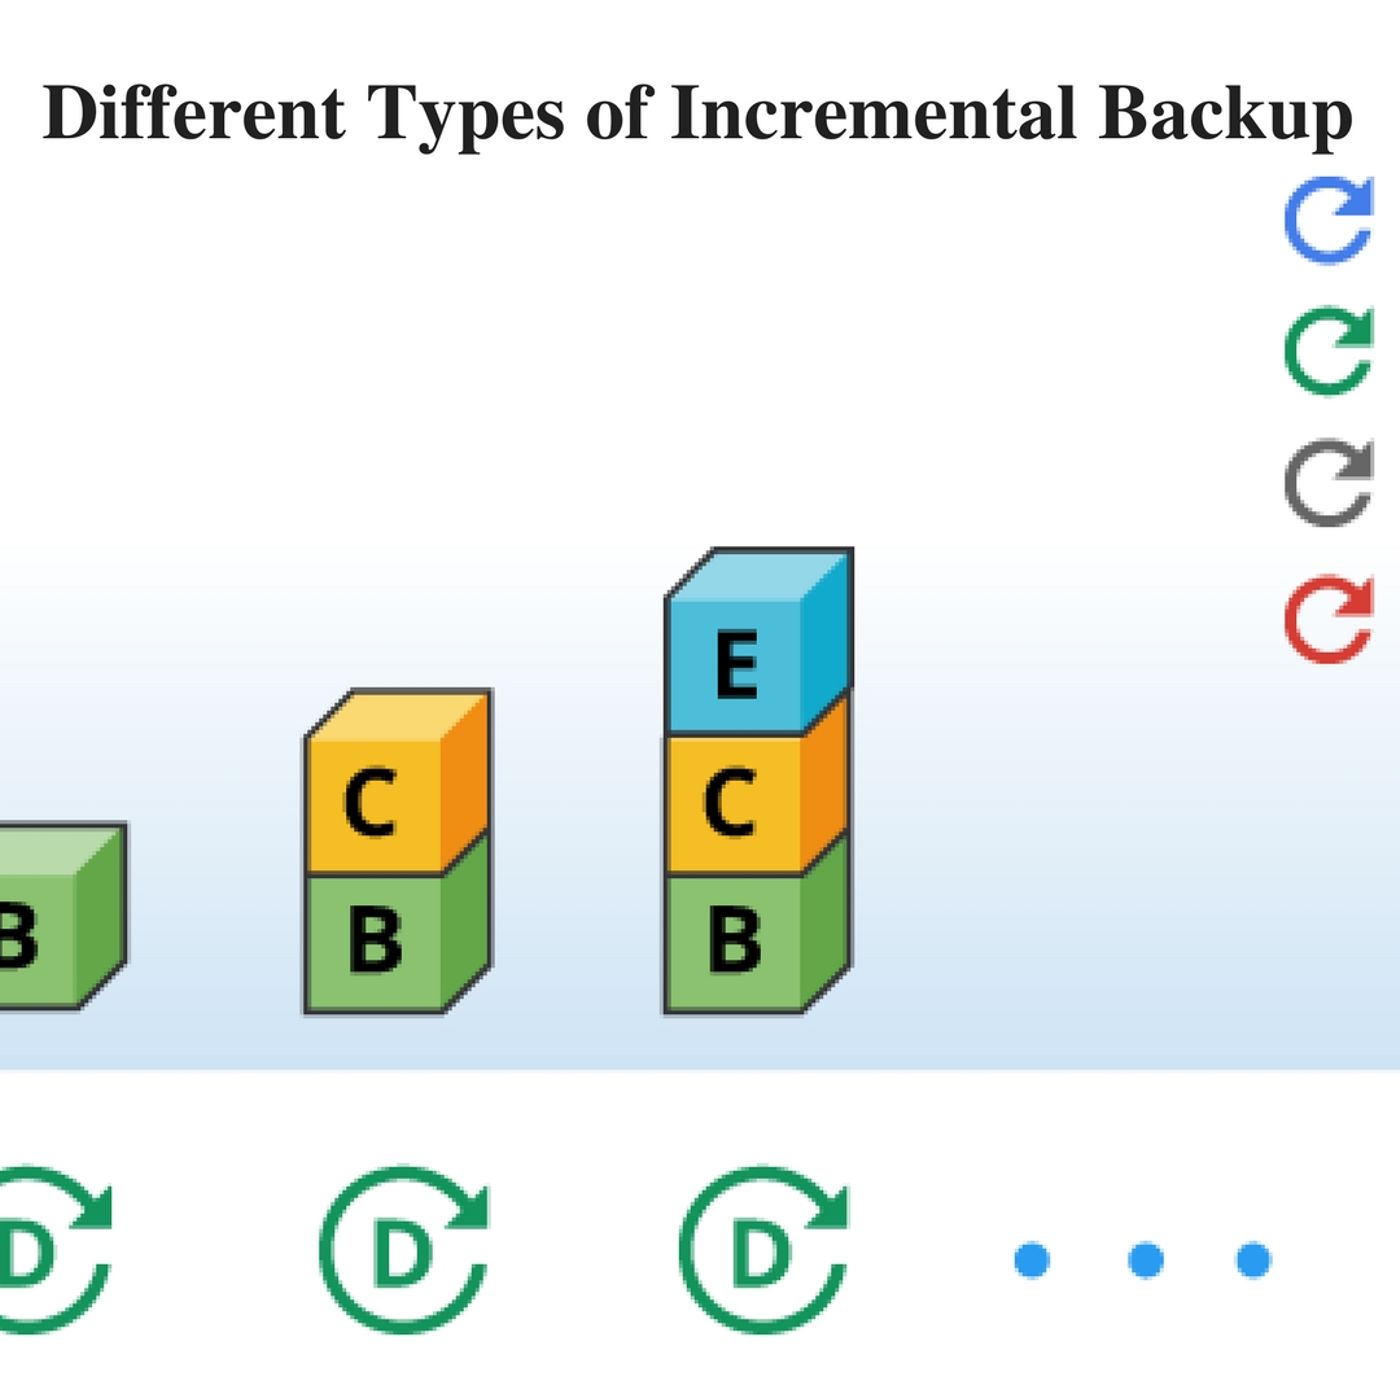 Different Types of Incremental Backup